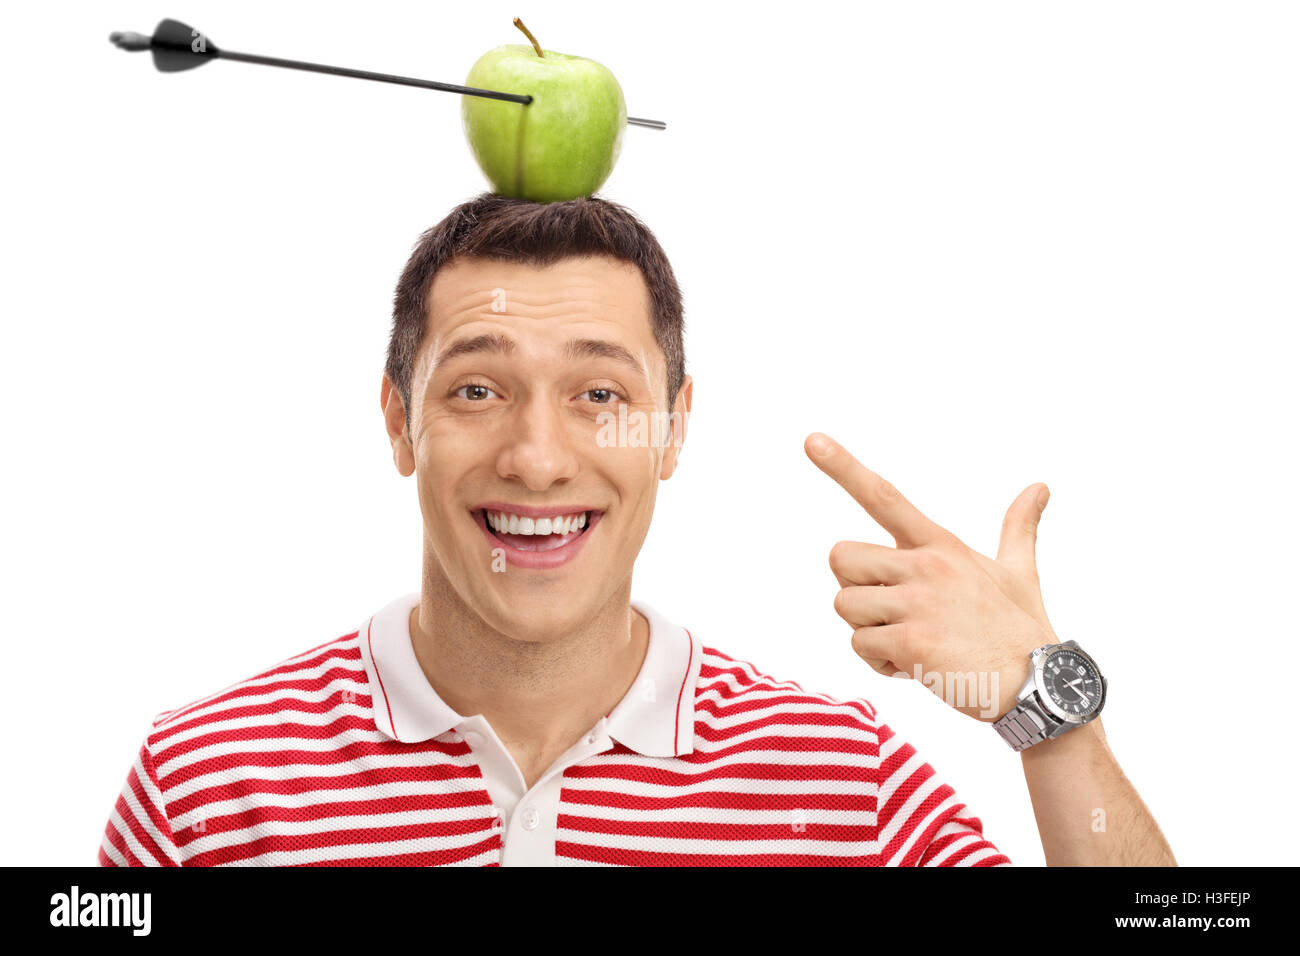 Delighted man pointing at an apple pierced by an arrow on his head isolated on white background Stock Photo